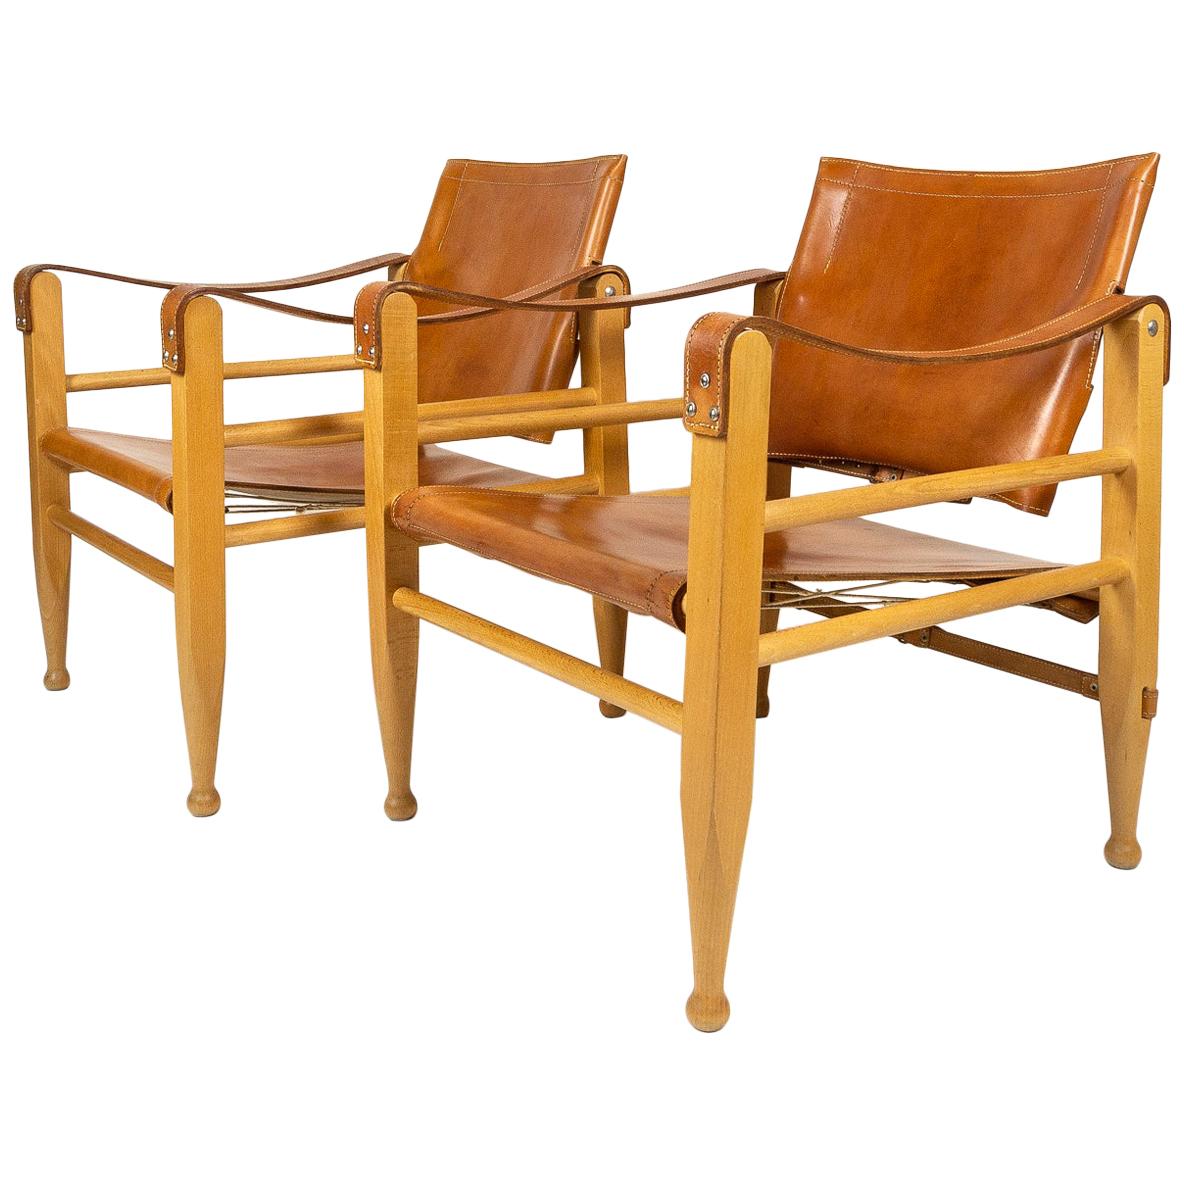 Pair of Cognac Leather and Beech Aage Bruun Safari Chairs, Denmark, 1960s